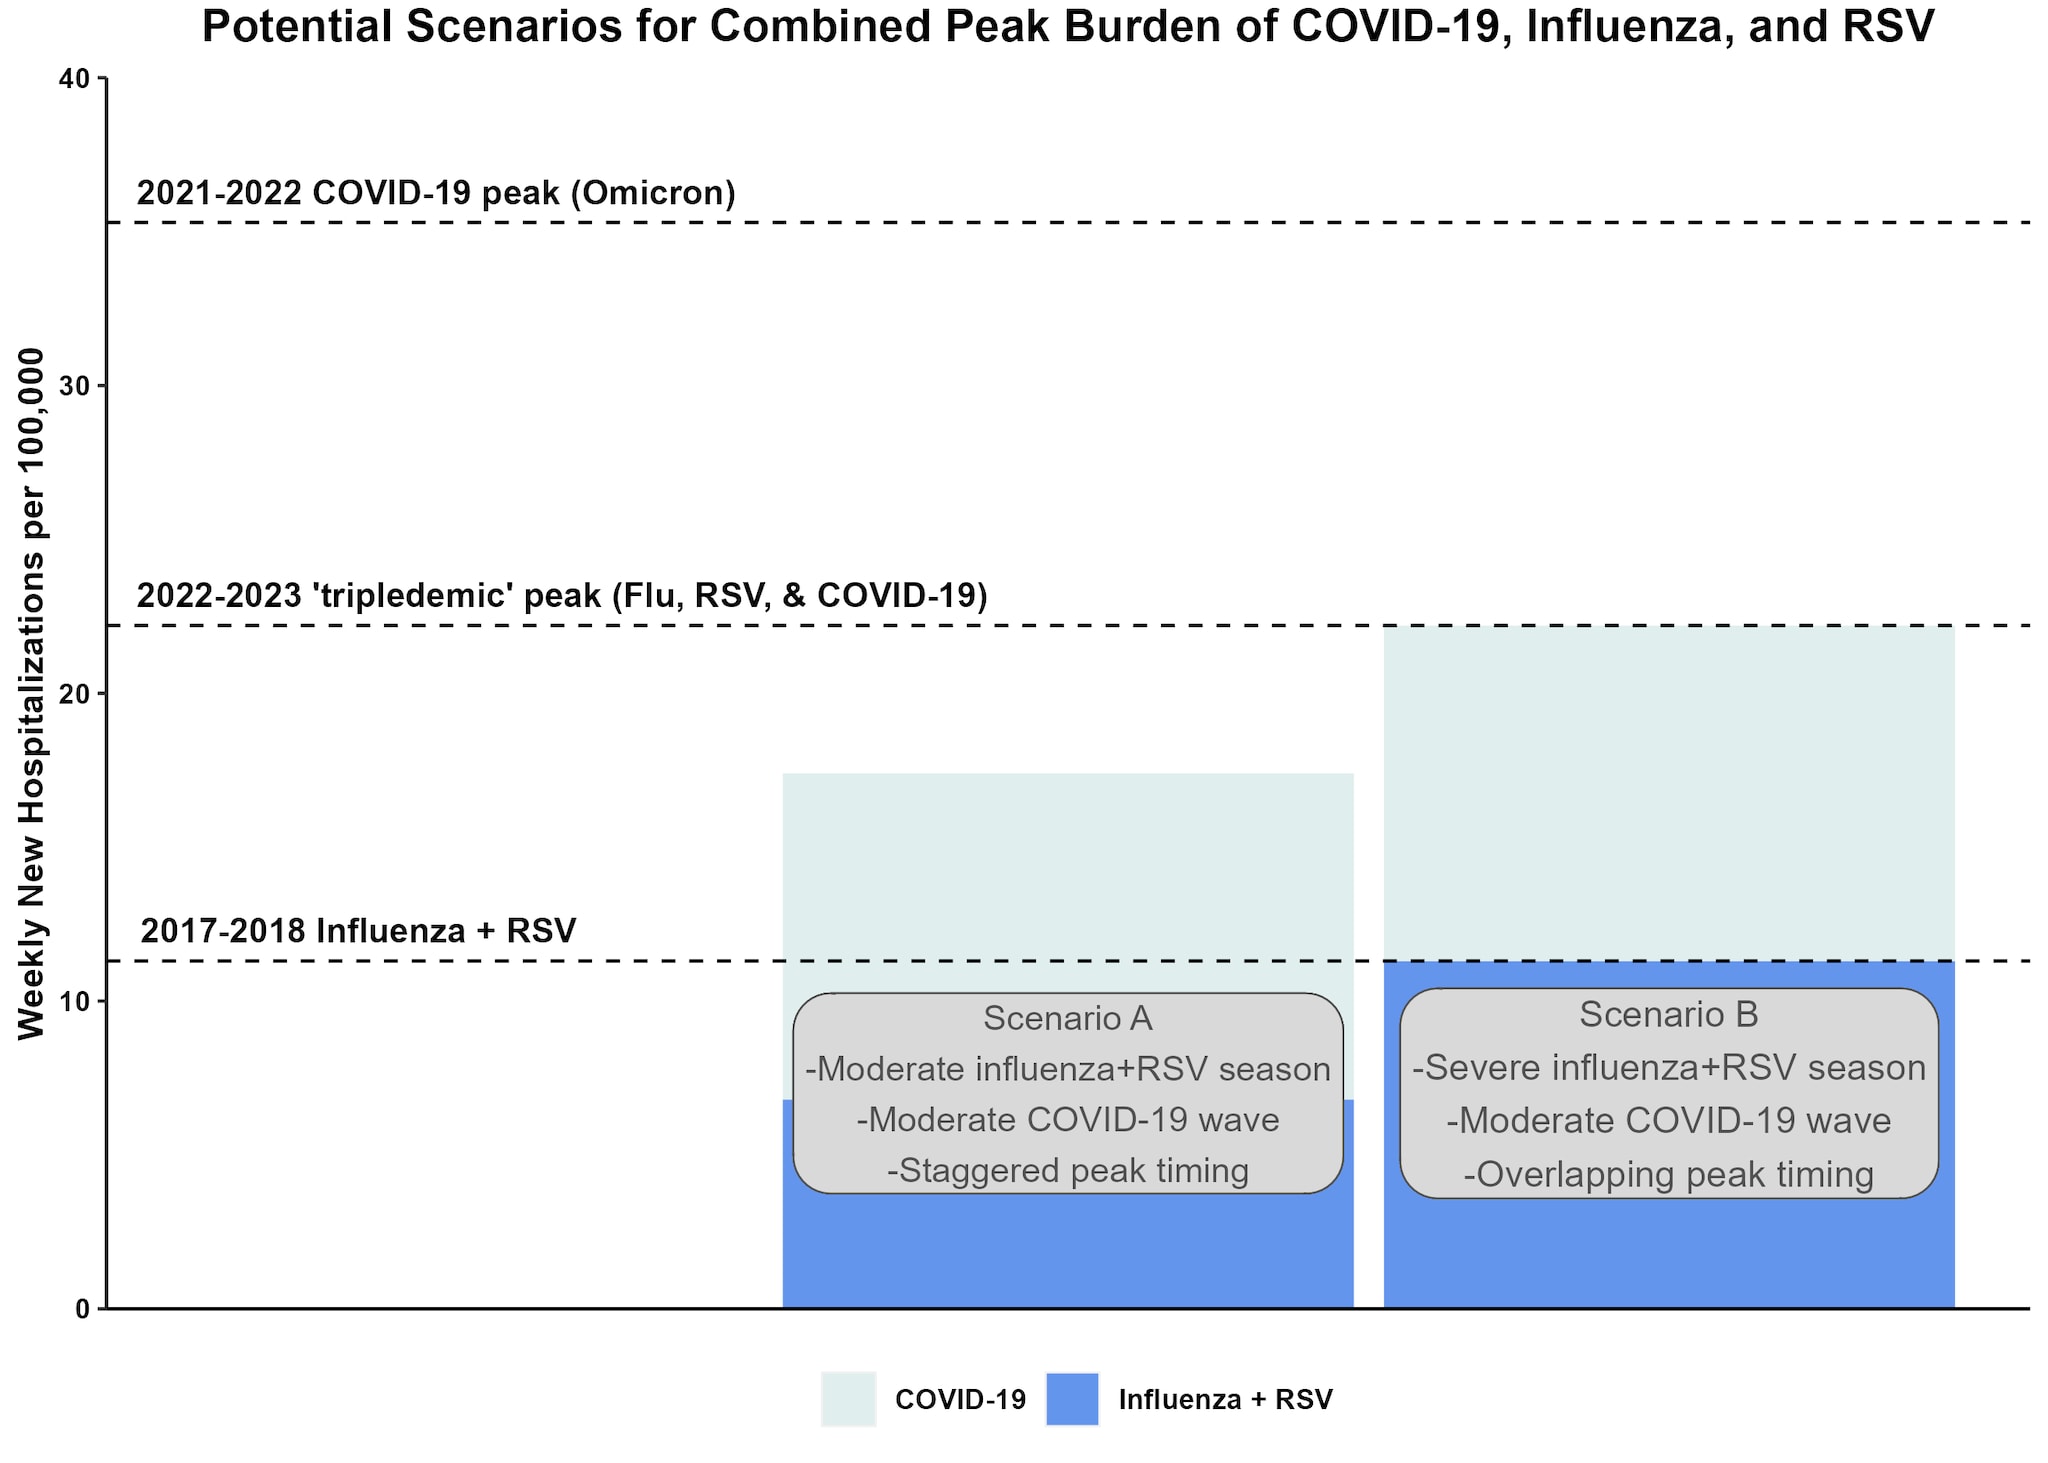 Image shows two scenarios for flu, RSV and COVID-19: Scenario A shows that with staggered peak timing, a moderate flu and RSV season with a moderate COVID-19 wave would create more burden on the healthcare system than the 2017-2018 flu and RSV season with about 17 new weekly hospitalizations per 100,000 people. Scenario B shows that with overlapping peak timing, a severe RSV and flu season with a moderate COVID-19 wave would create the same level of burden on the healthcare system as the 2022-2023 “tripledemic” season with about 23 new weekly hospitalizations per 100,000 people.